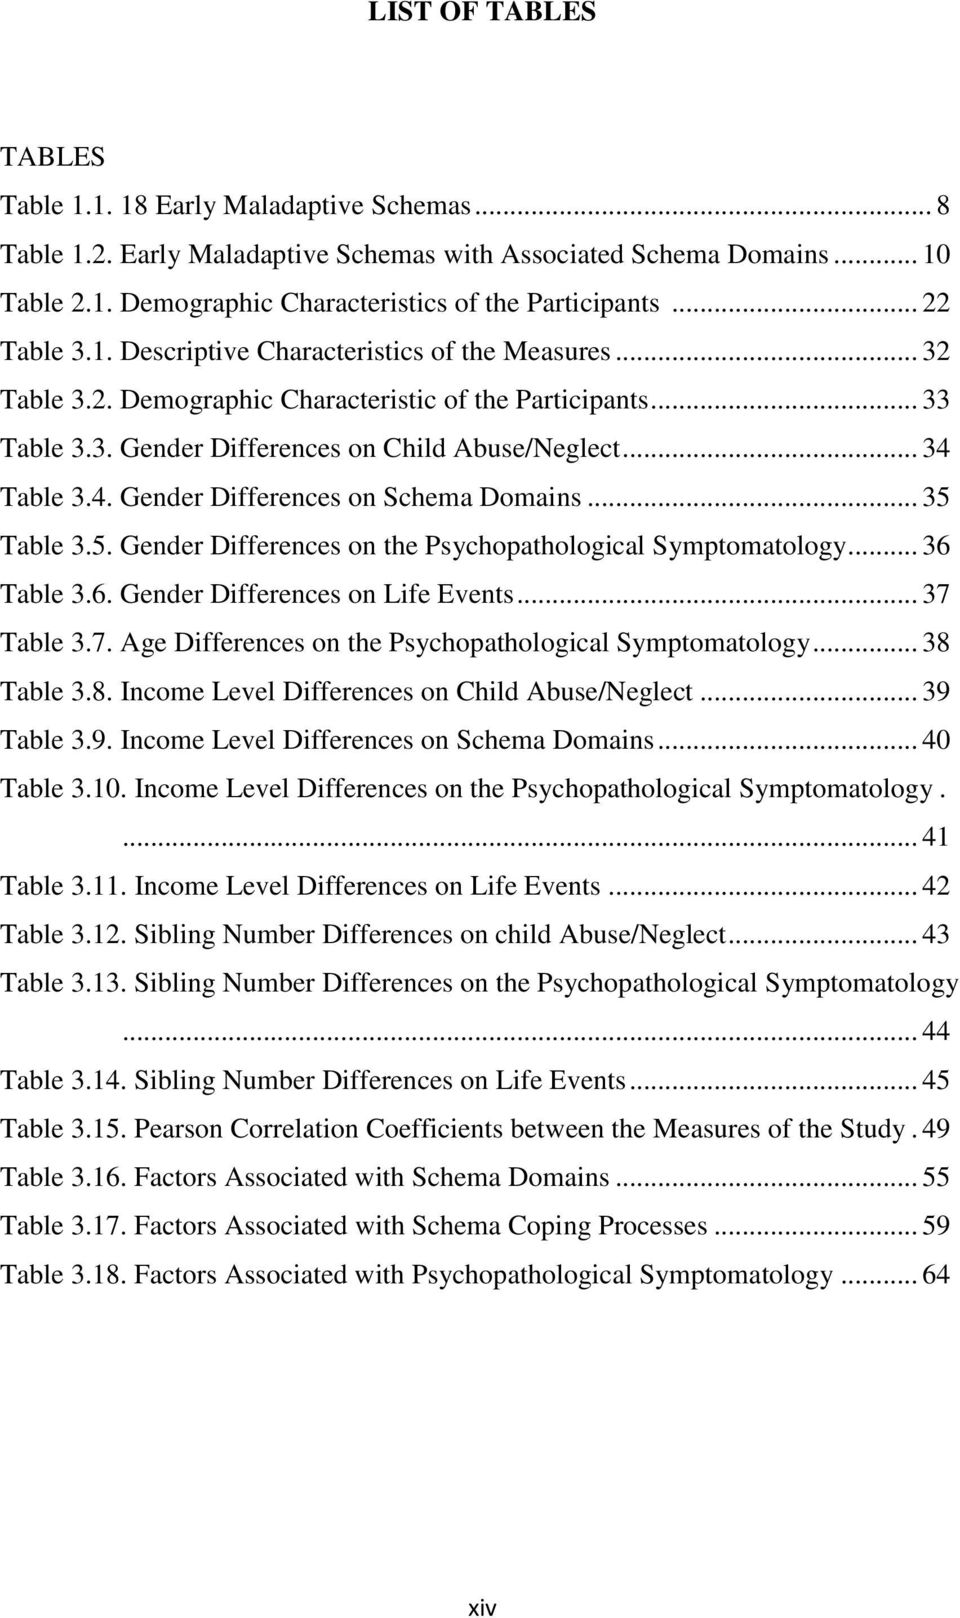 Table 3.4. Gender Differences on Schema Domains... 35 Table 3.5. Gender Differences on the Psychopathological Symptomatology... 36 Table 3.6. Gender Differences on Life Events... 37 